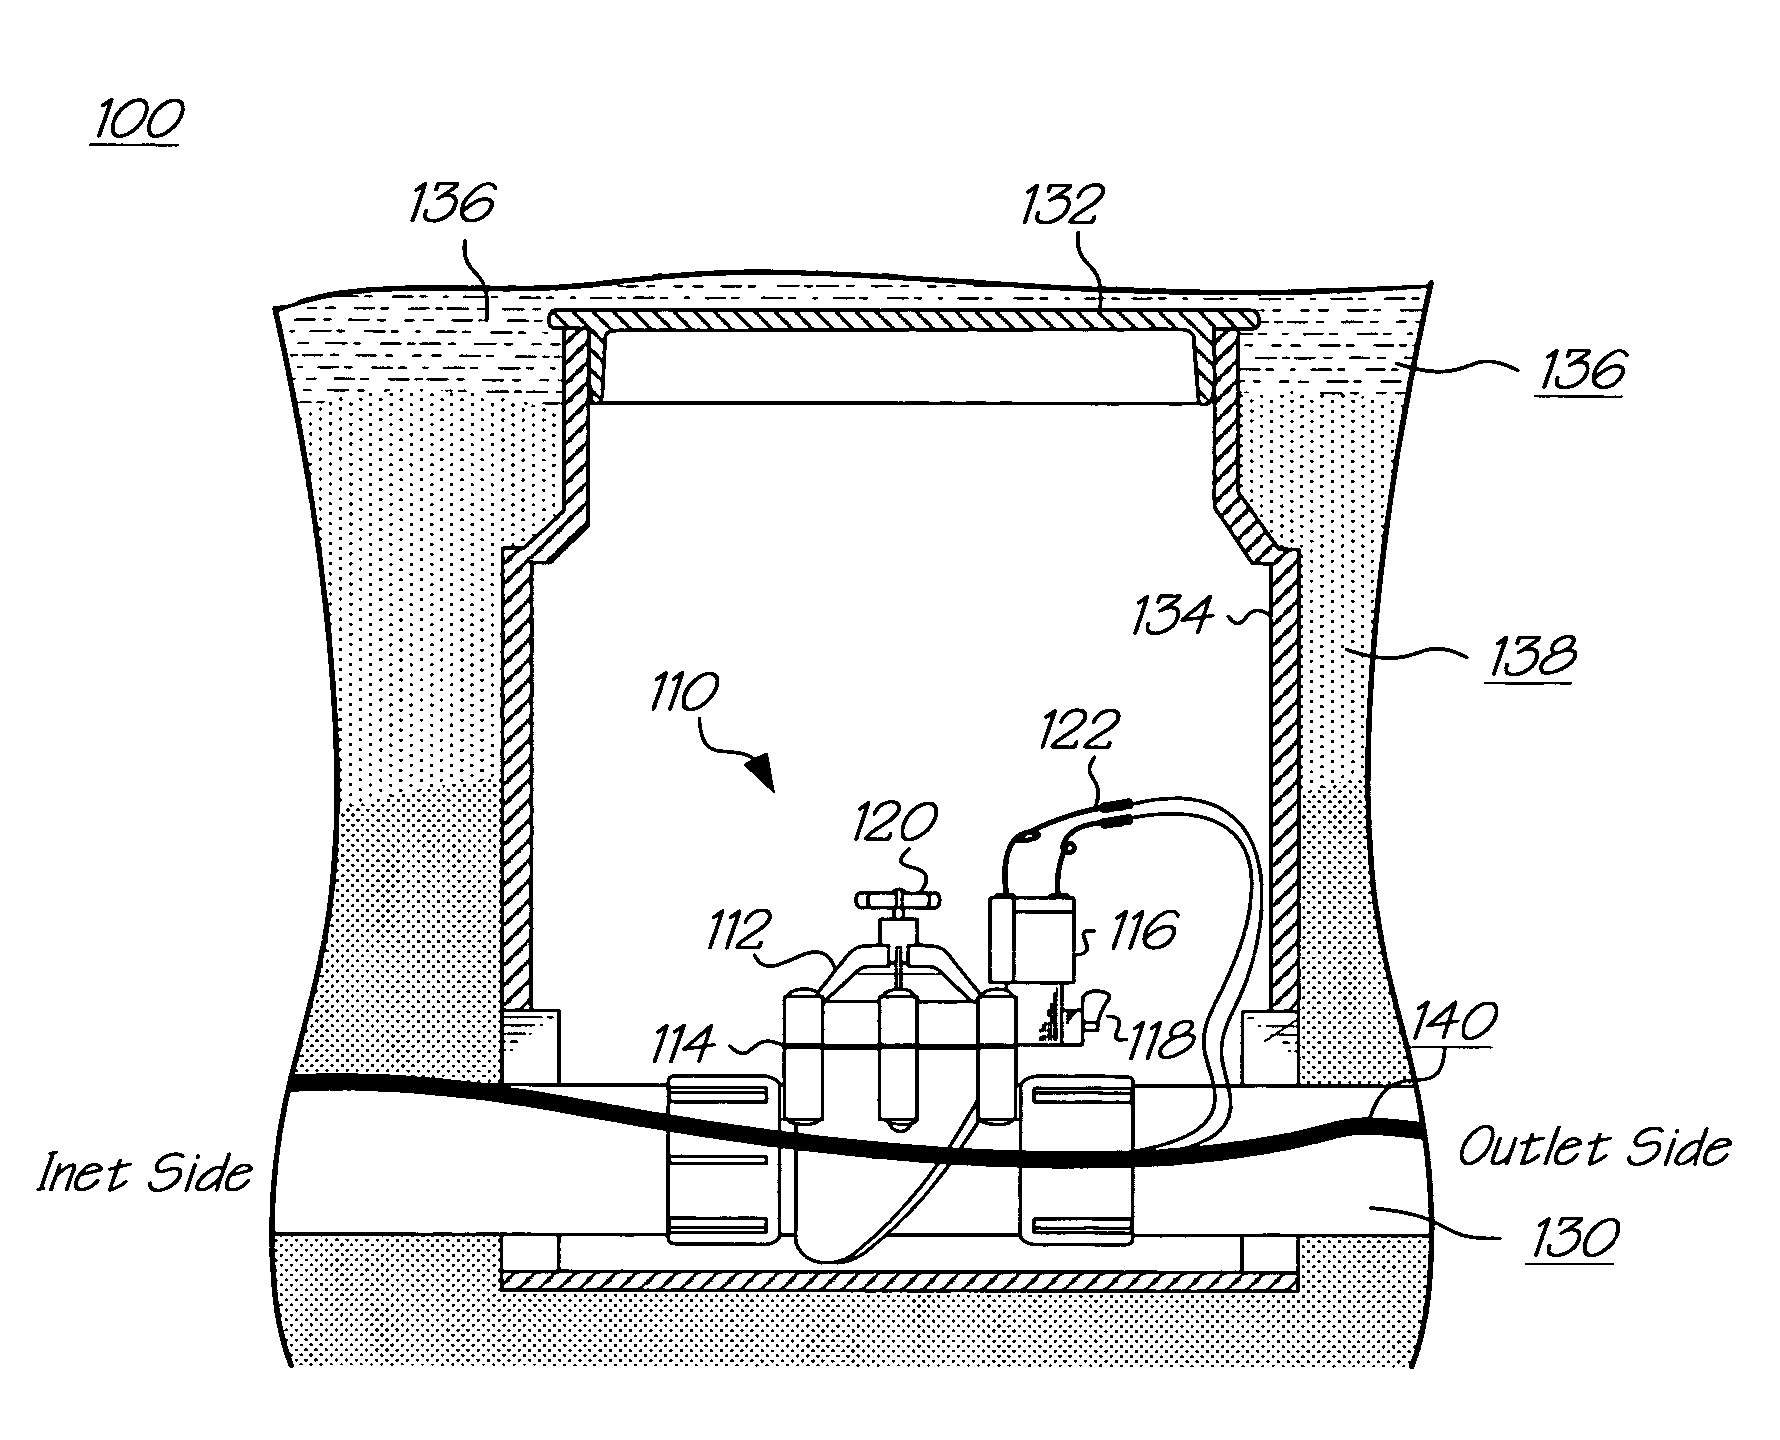 Irrigation controller with integrated valve locator